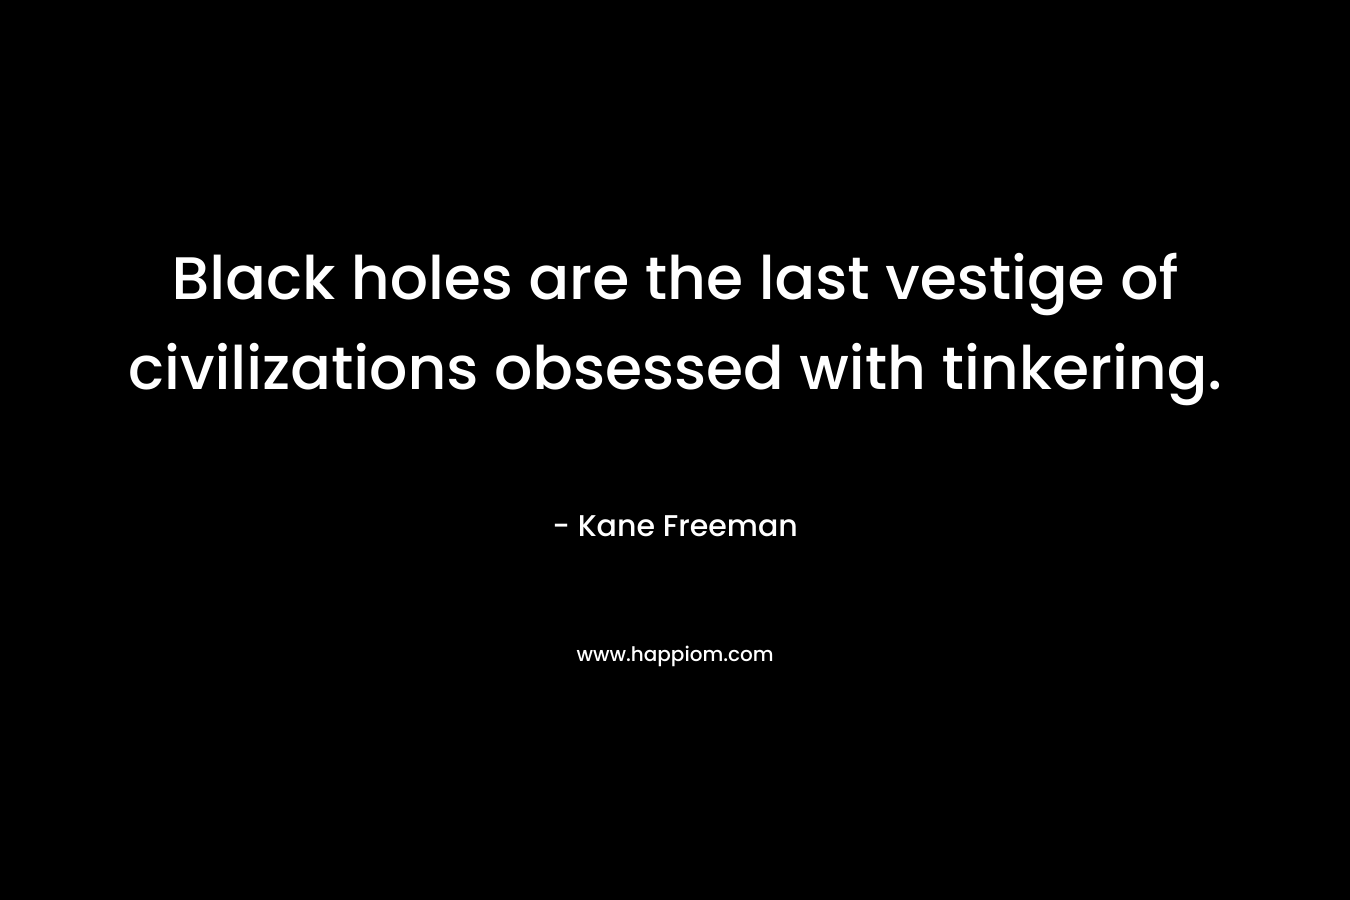 Black holes are the last vestige of civilizations obsessed with tinkering.